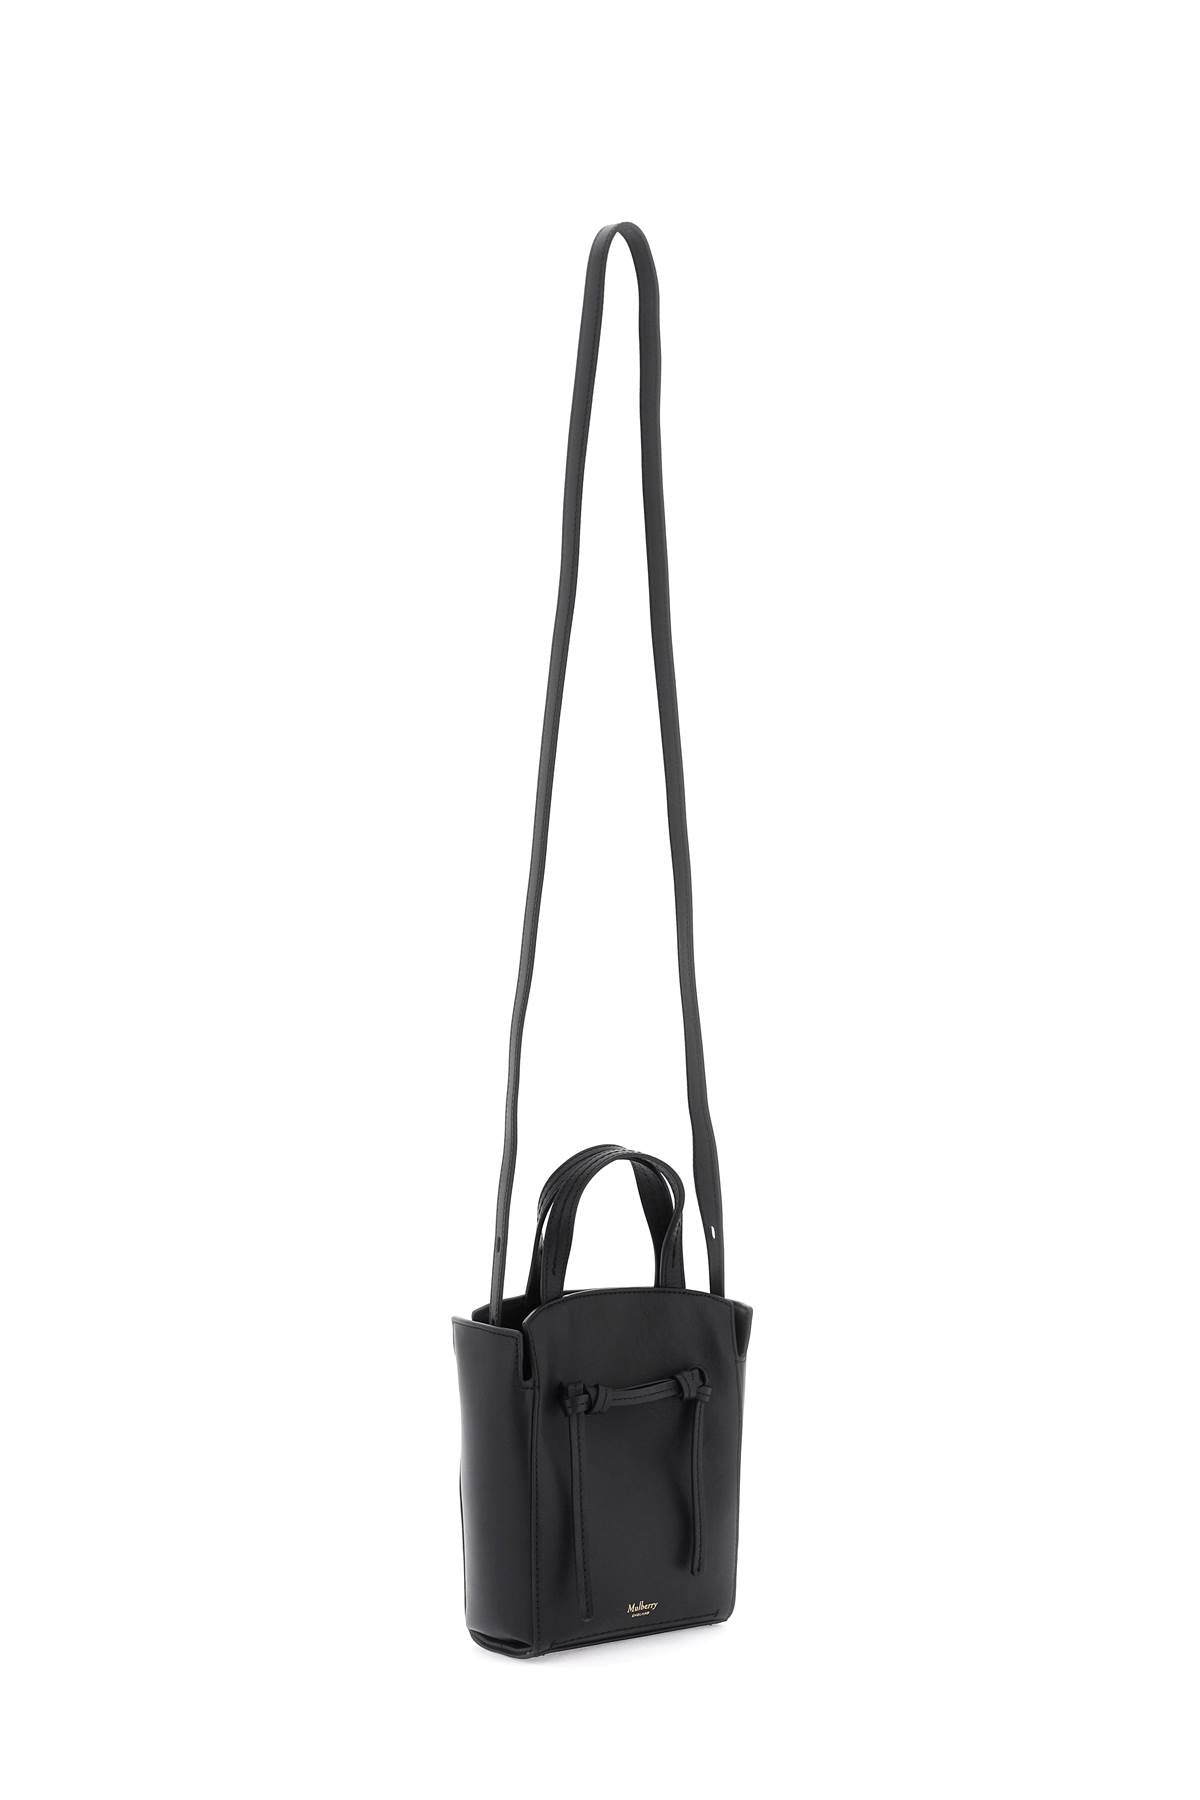 MULBERRY Mini Clovelly Black Leather Tote Bag with Gold Accents and Adjustable Strap